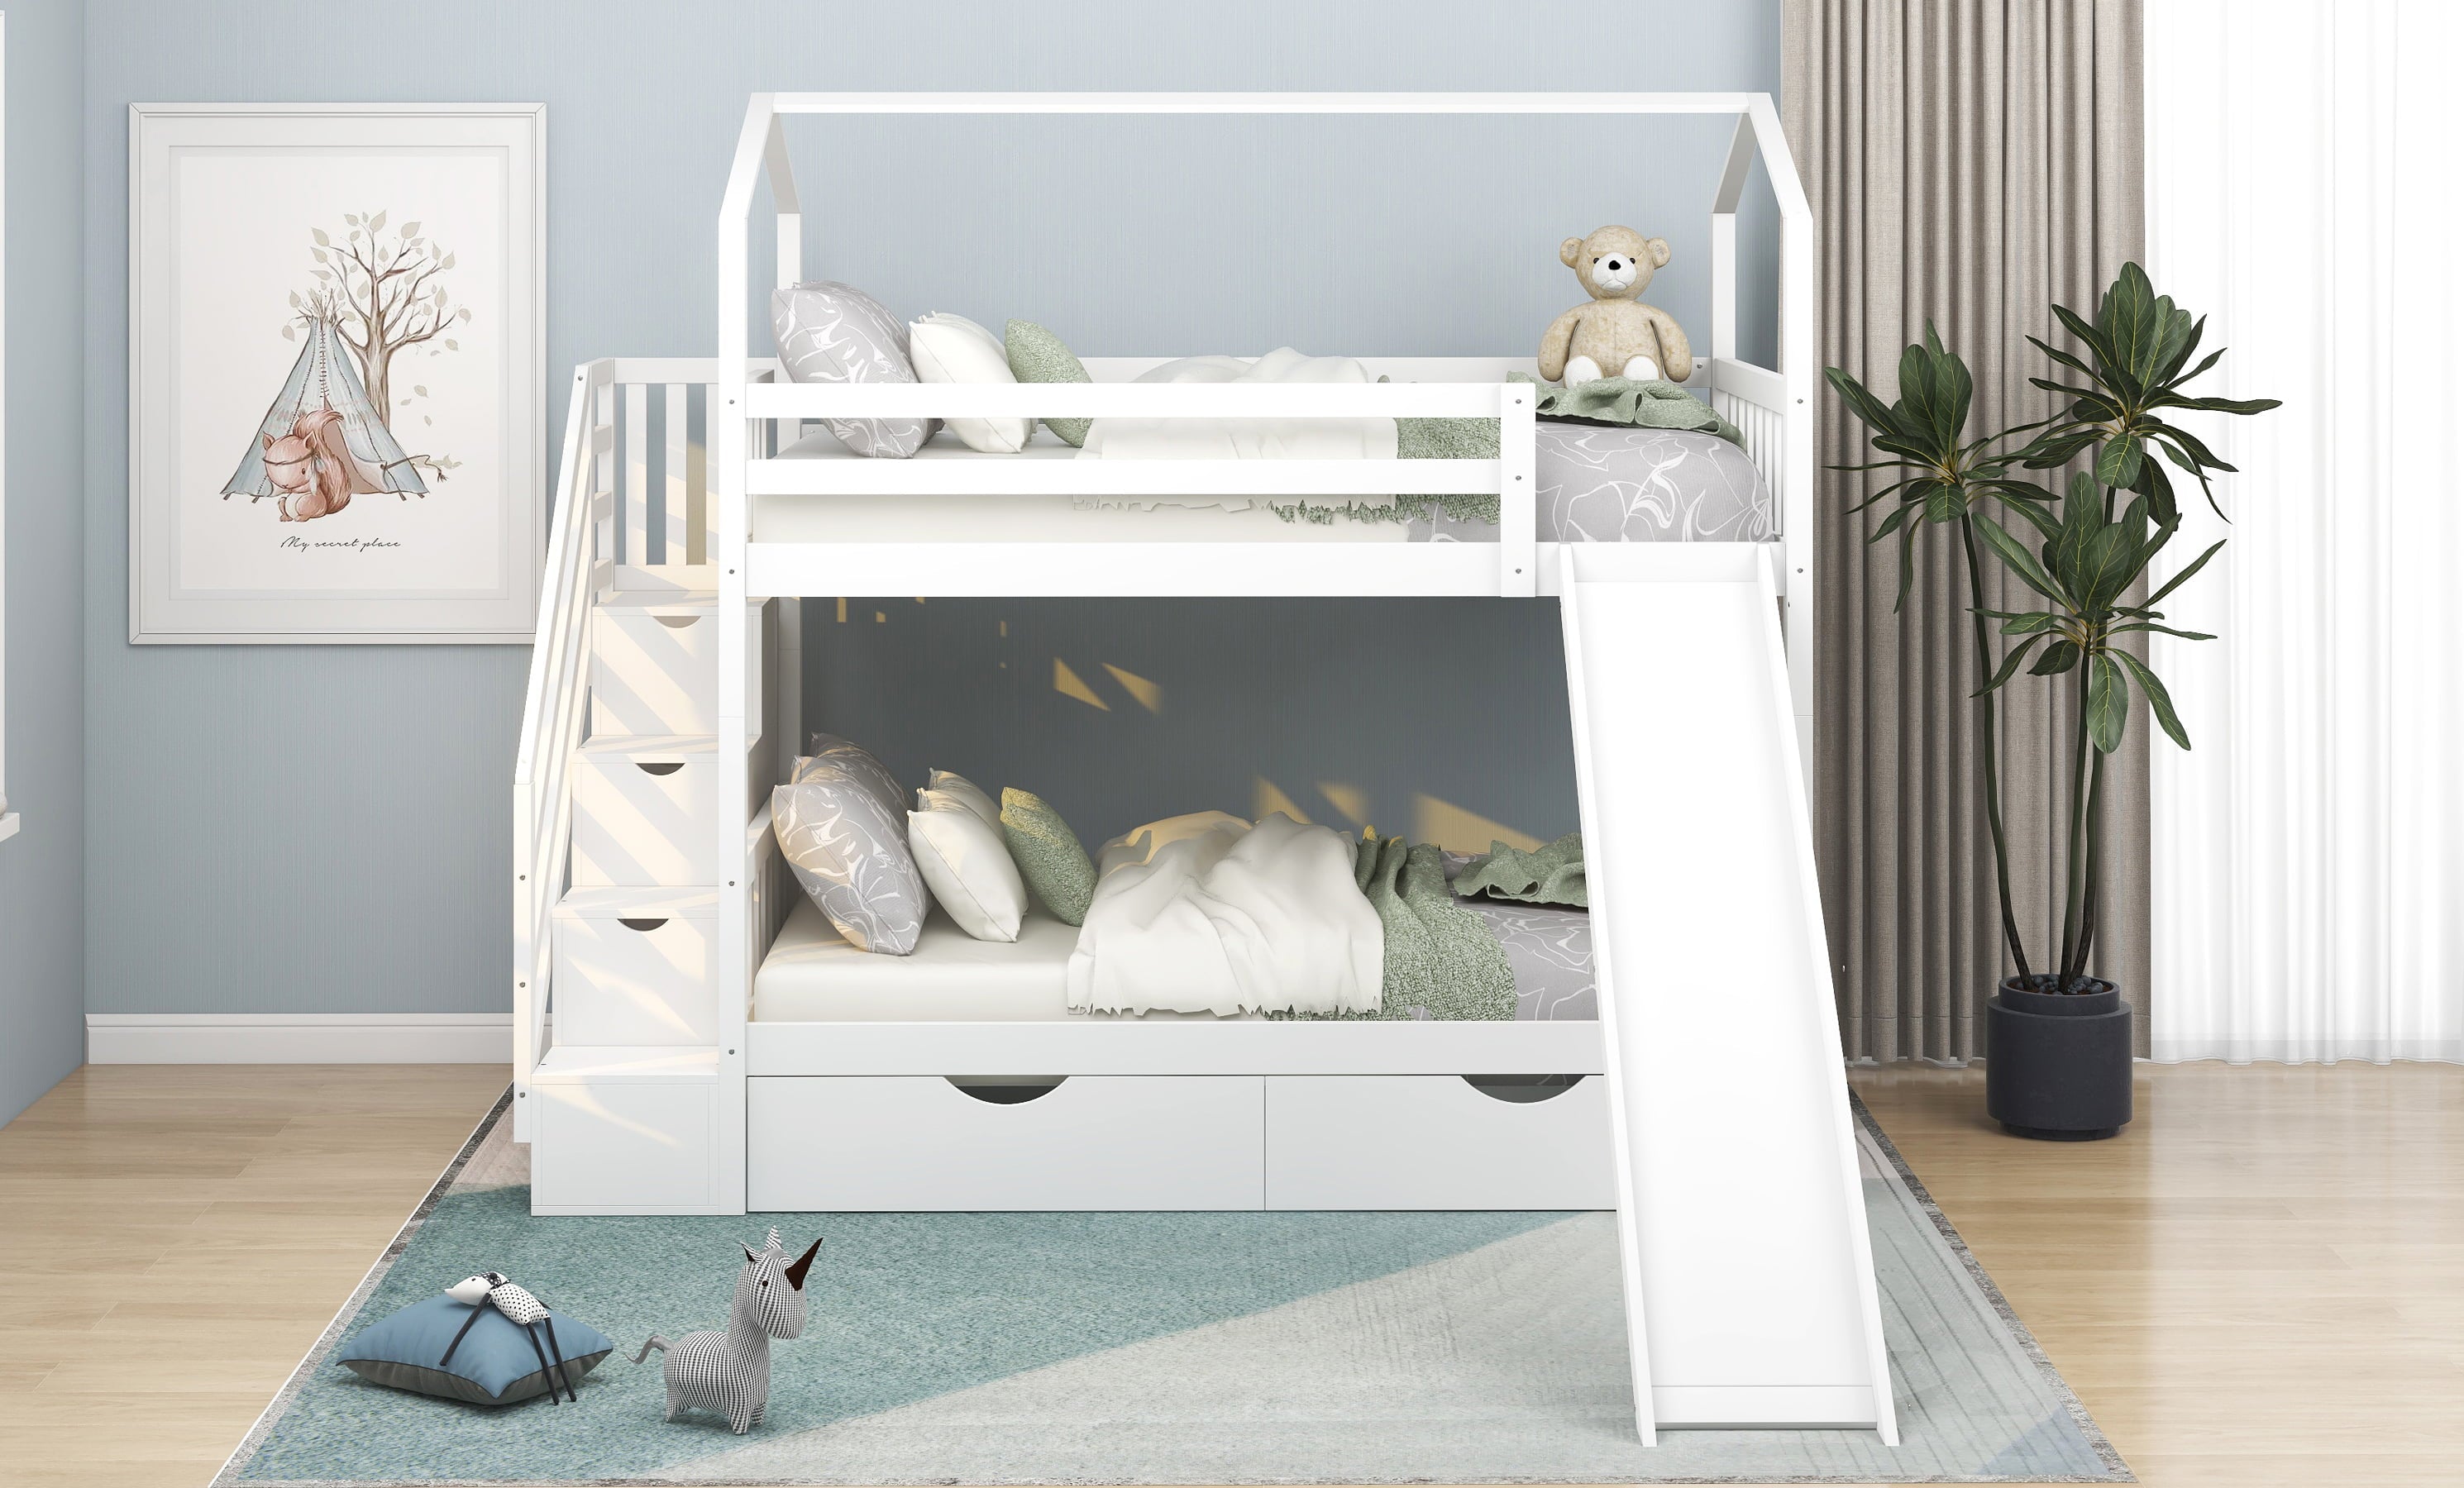 Euroco Twin House Bunk Bed with Storage for Kids, White